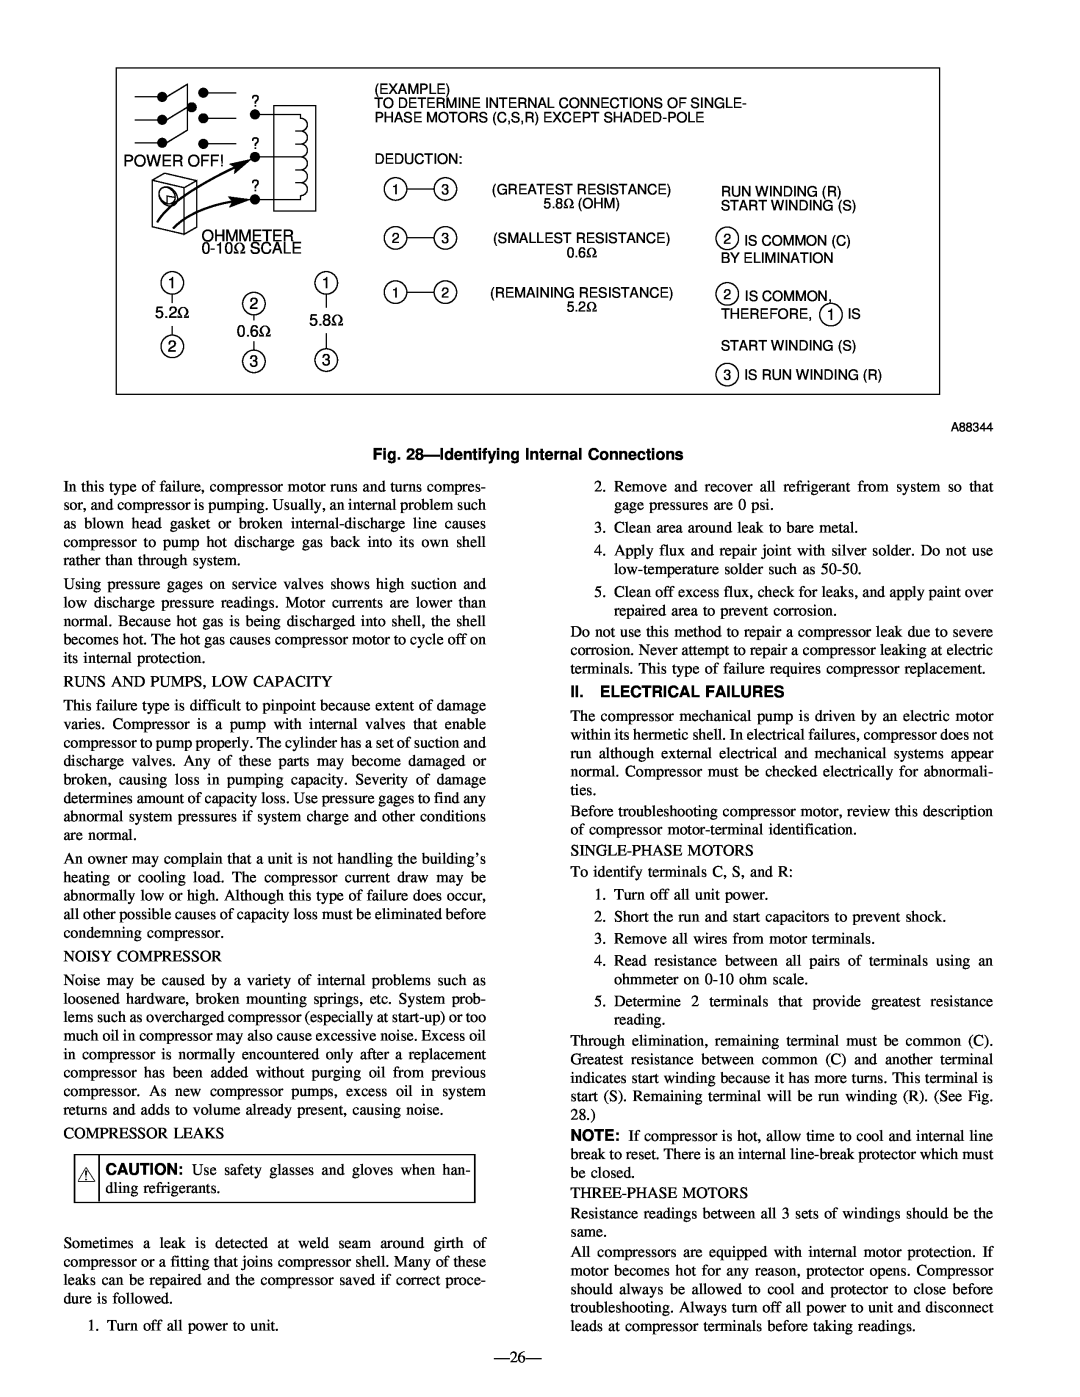 Bryant R-22 service manual IdentifyingInternal Connections, Ii. Electrical Failures 